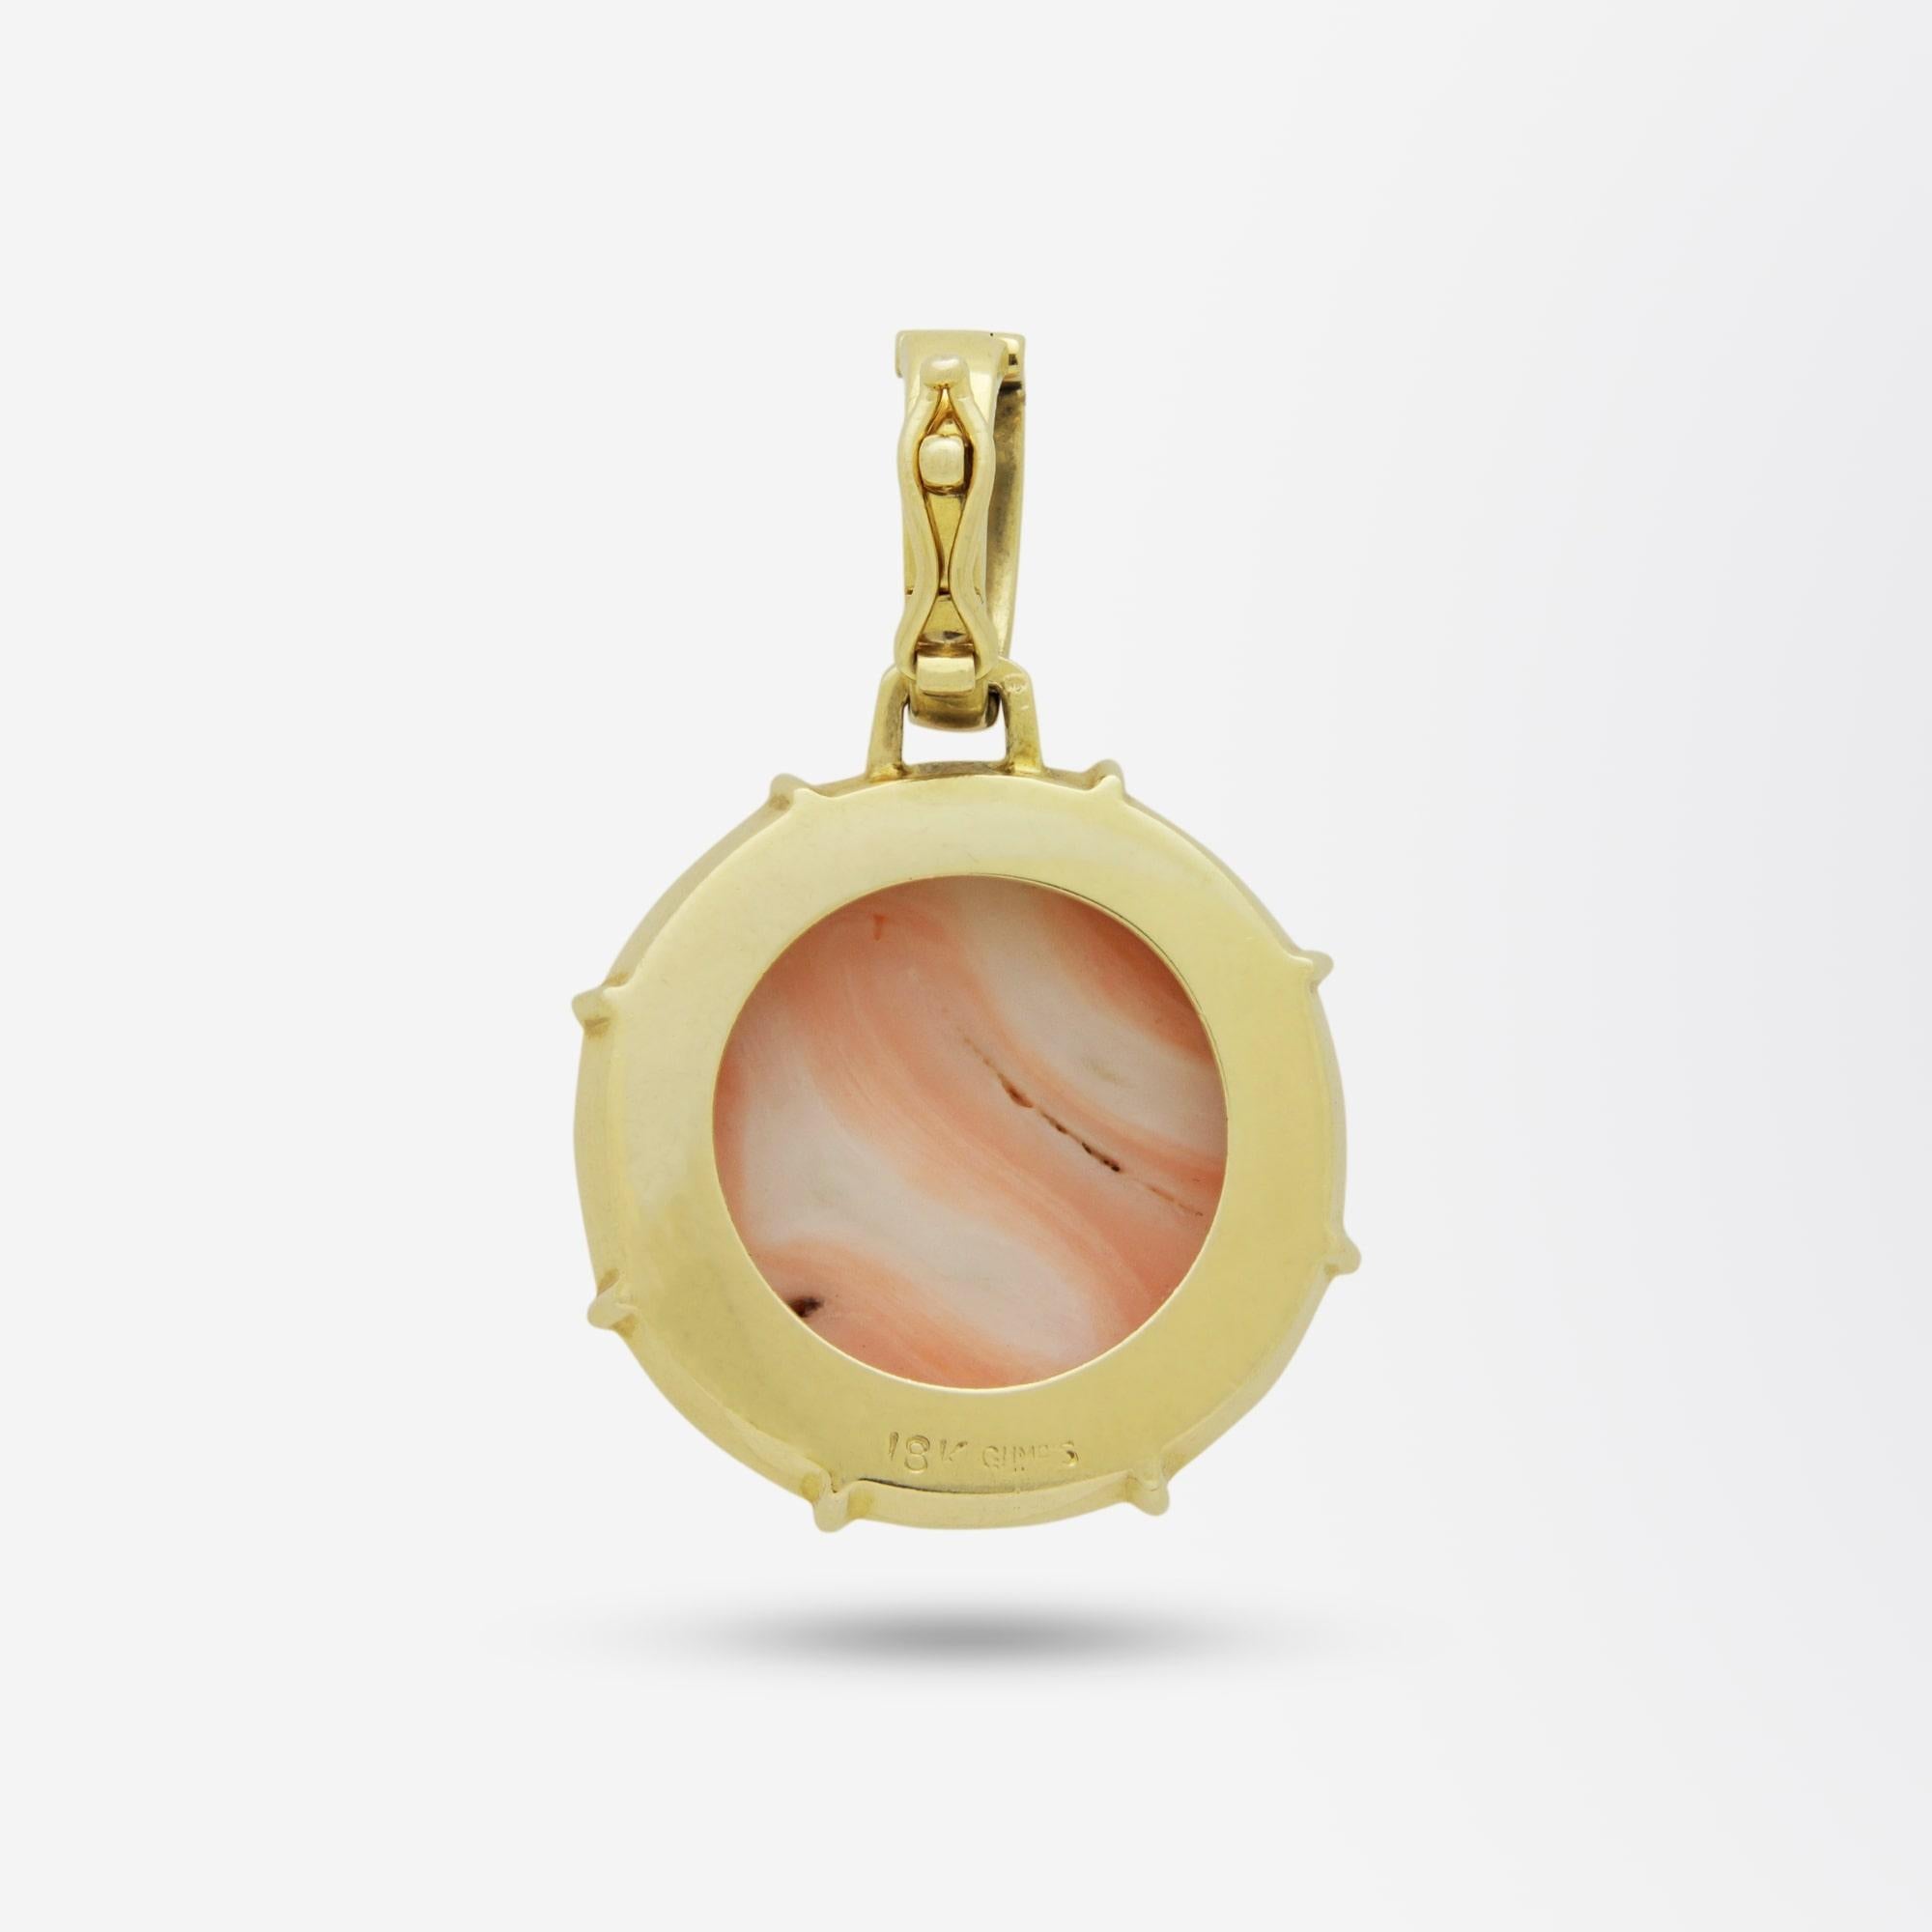 A bold 18 karat gold, coral and diamond pendant enhancer by Gumps. The pendant centres on a round cabochon piece of angel-skin coral which is framed in yellow gold with a border of polished gold interspersed with panels of grain set brilliant cut